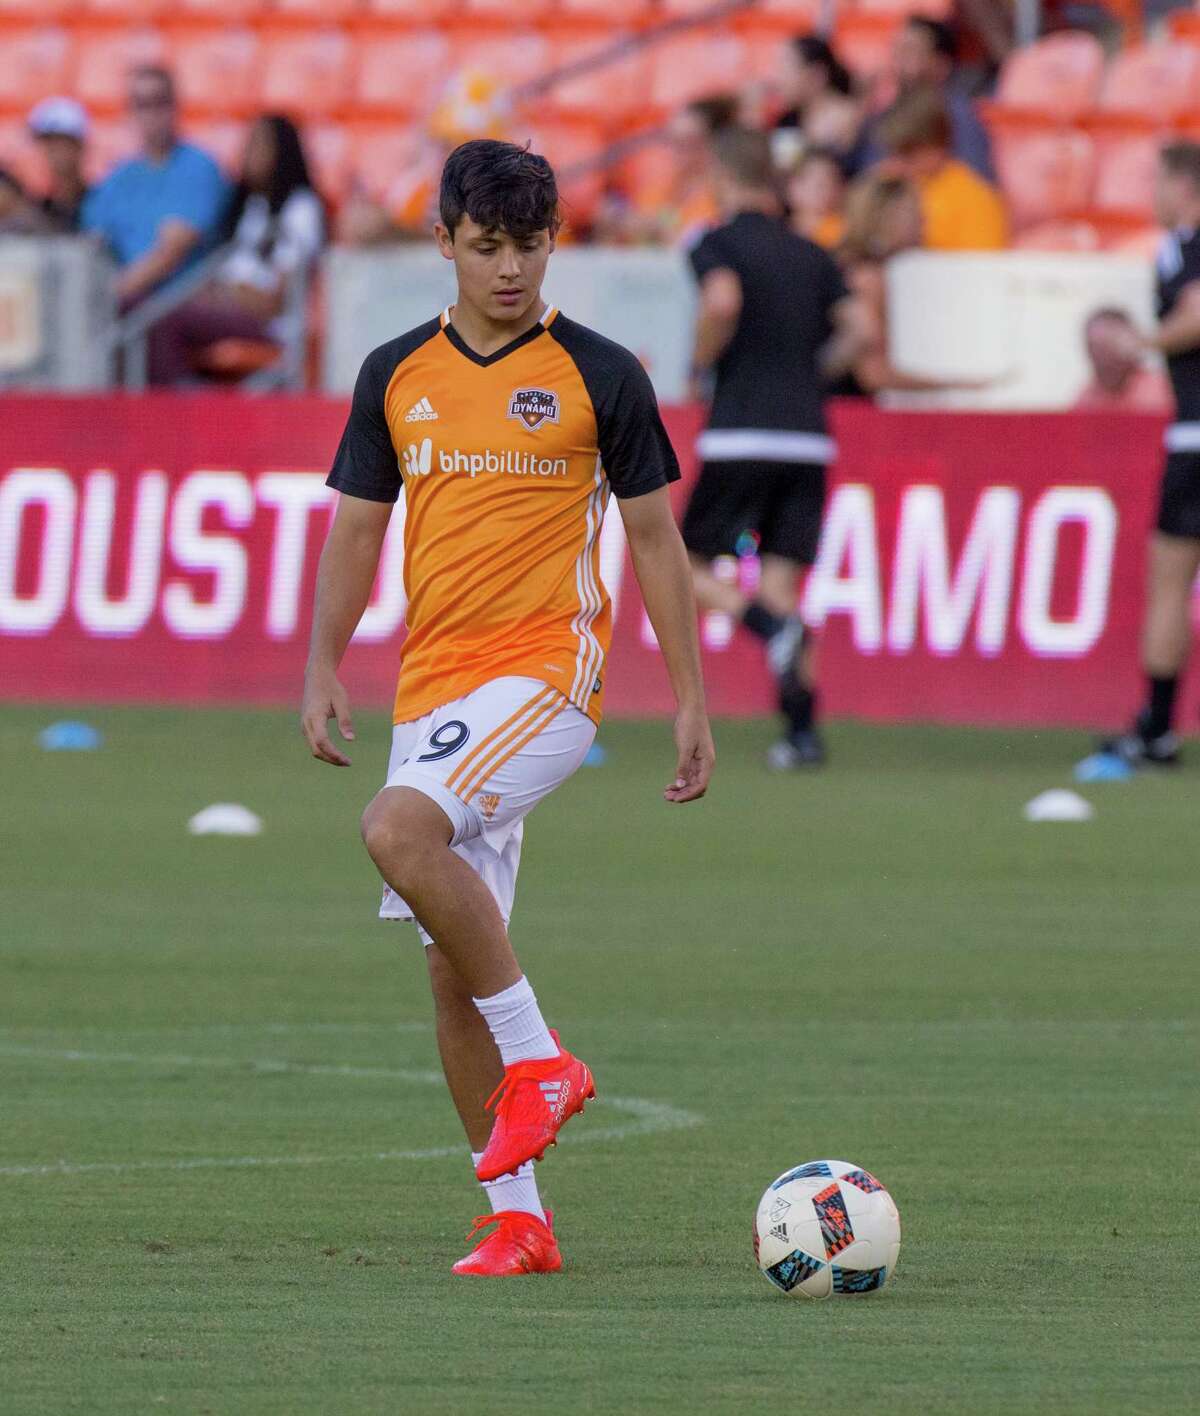 Houston Dynamo midfielder Christian Lucatero (29) on the field during practice before action between the between the Houston Dynamo and the San Jose Earthquakes during an MLS soccer game at BBVA Compass, Sunday, July 31, 2016, in Houston. (Juan DeLeon/for the Houston Chronicle)